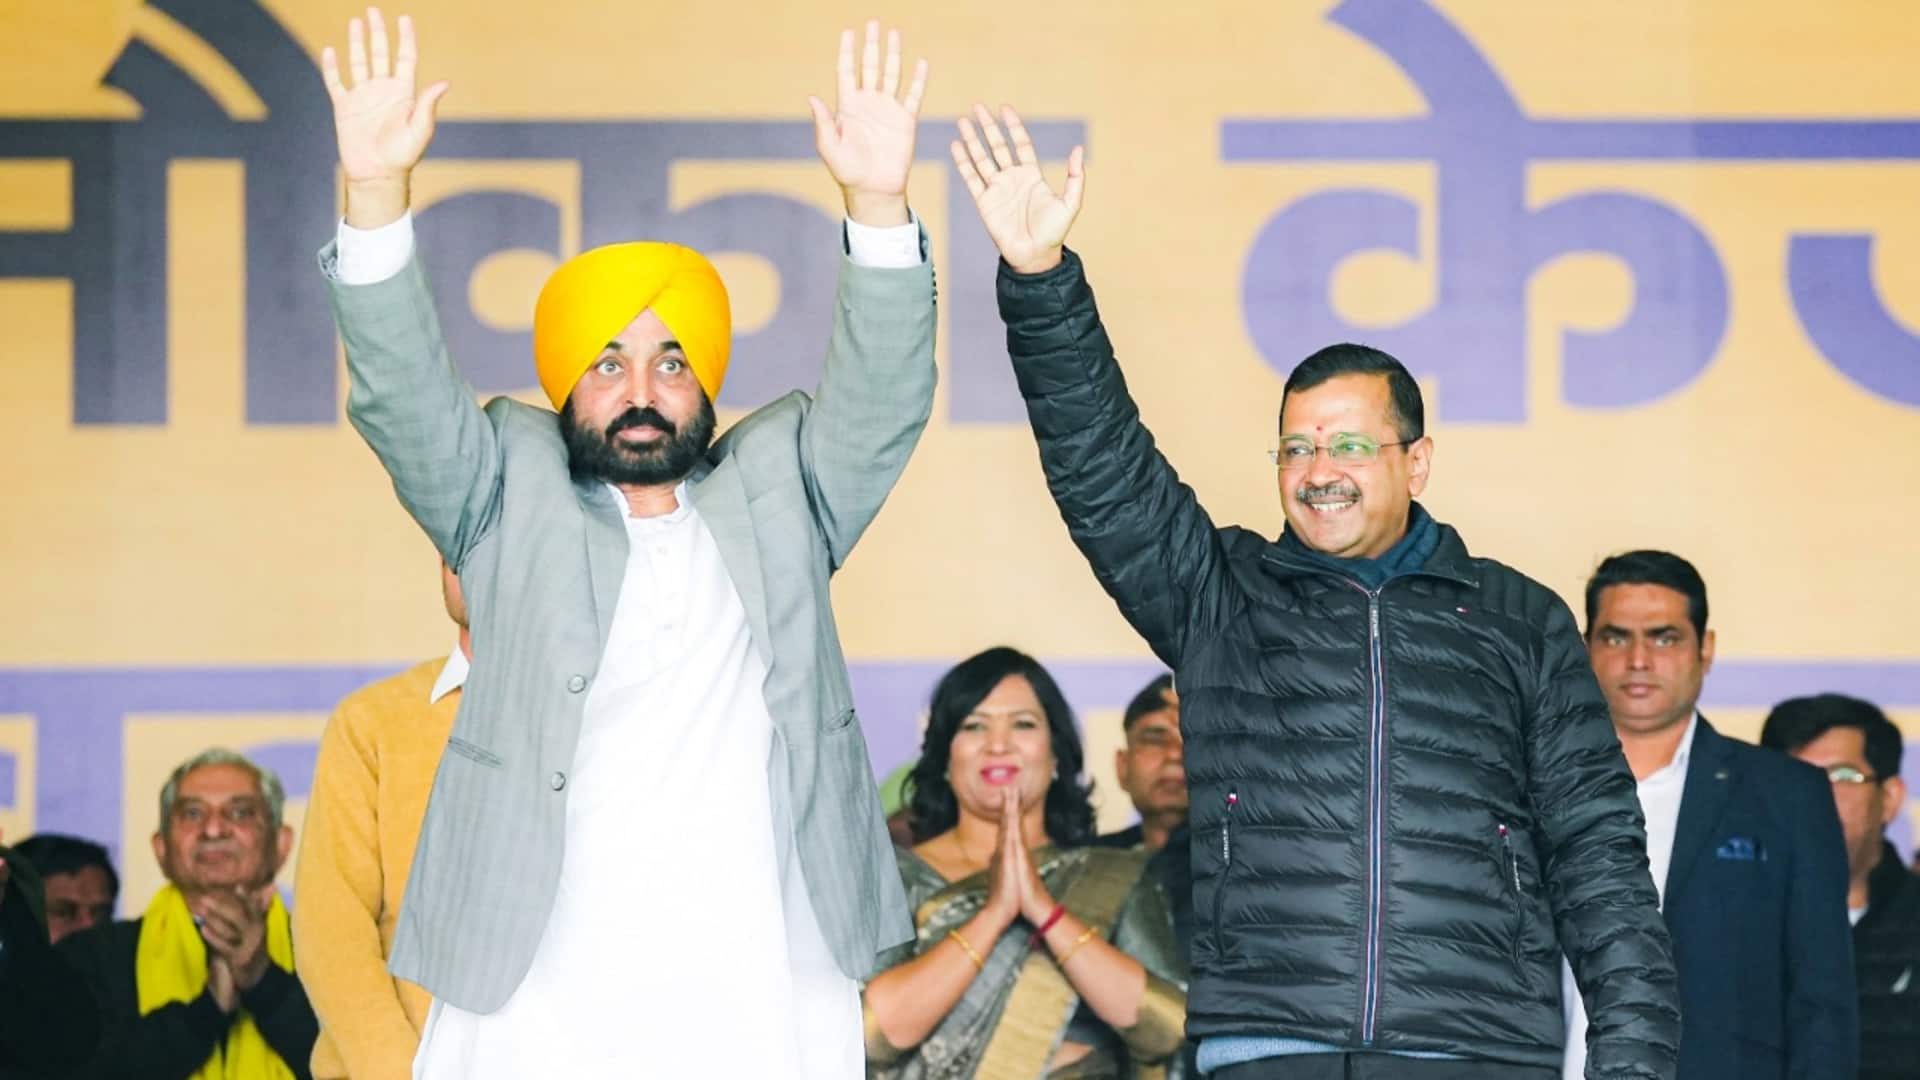 AAP to contest all Lok Sabha seats in Punjab, Chandigarh